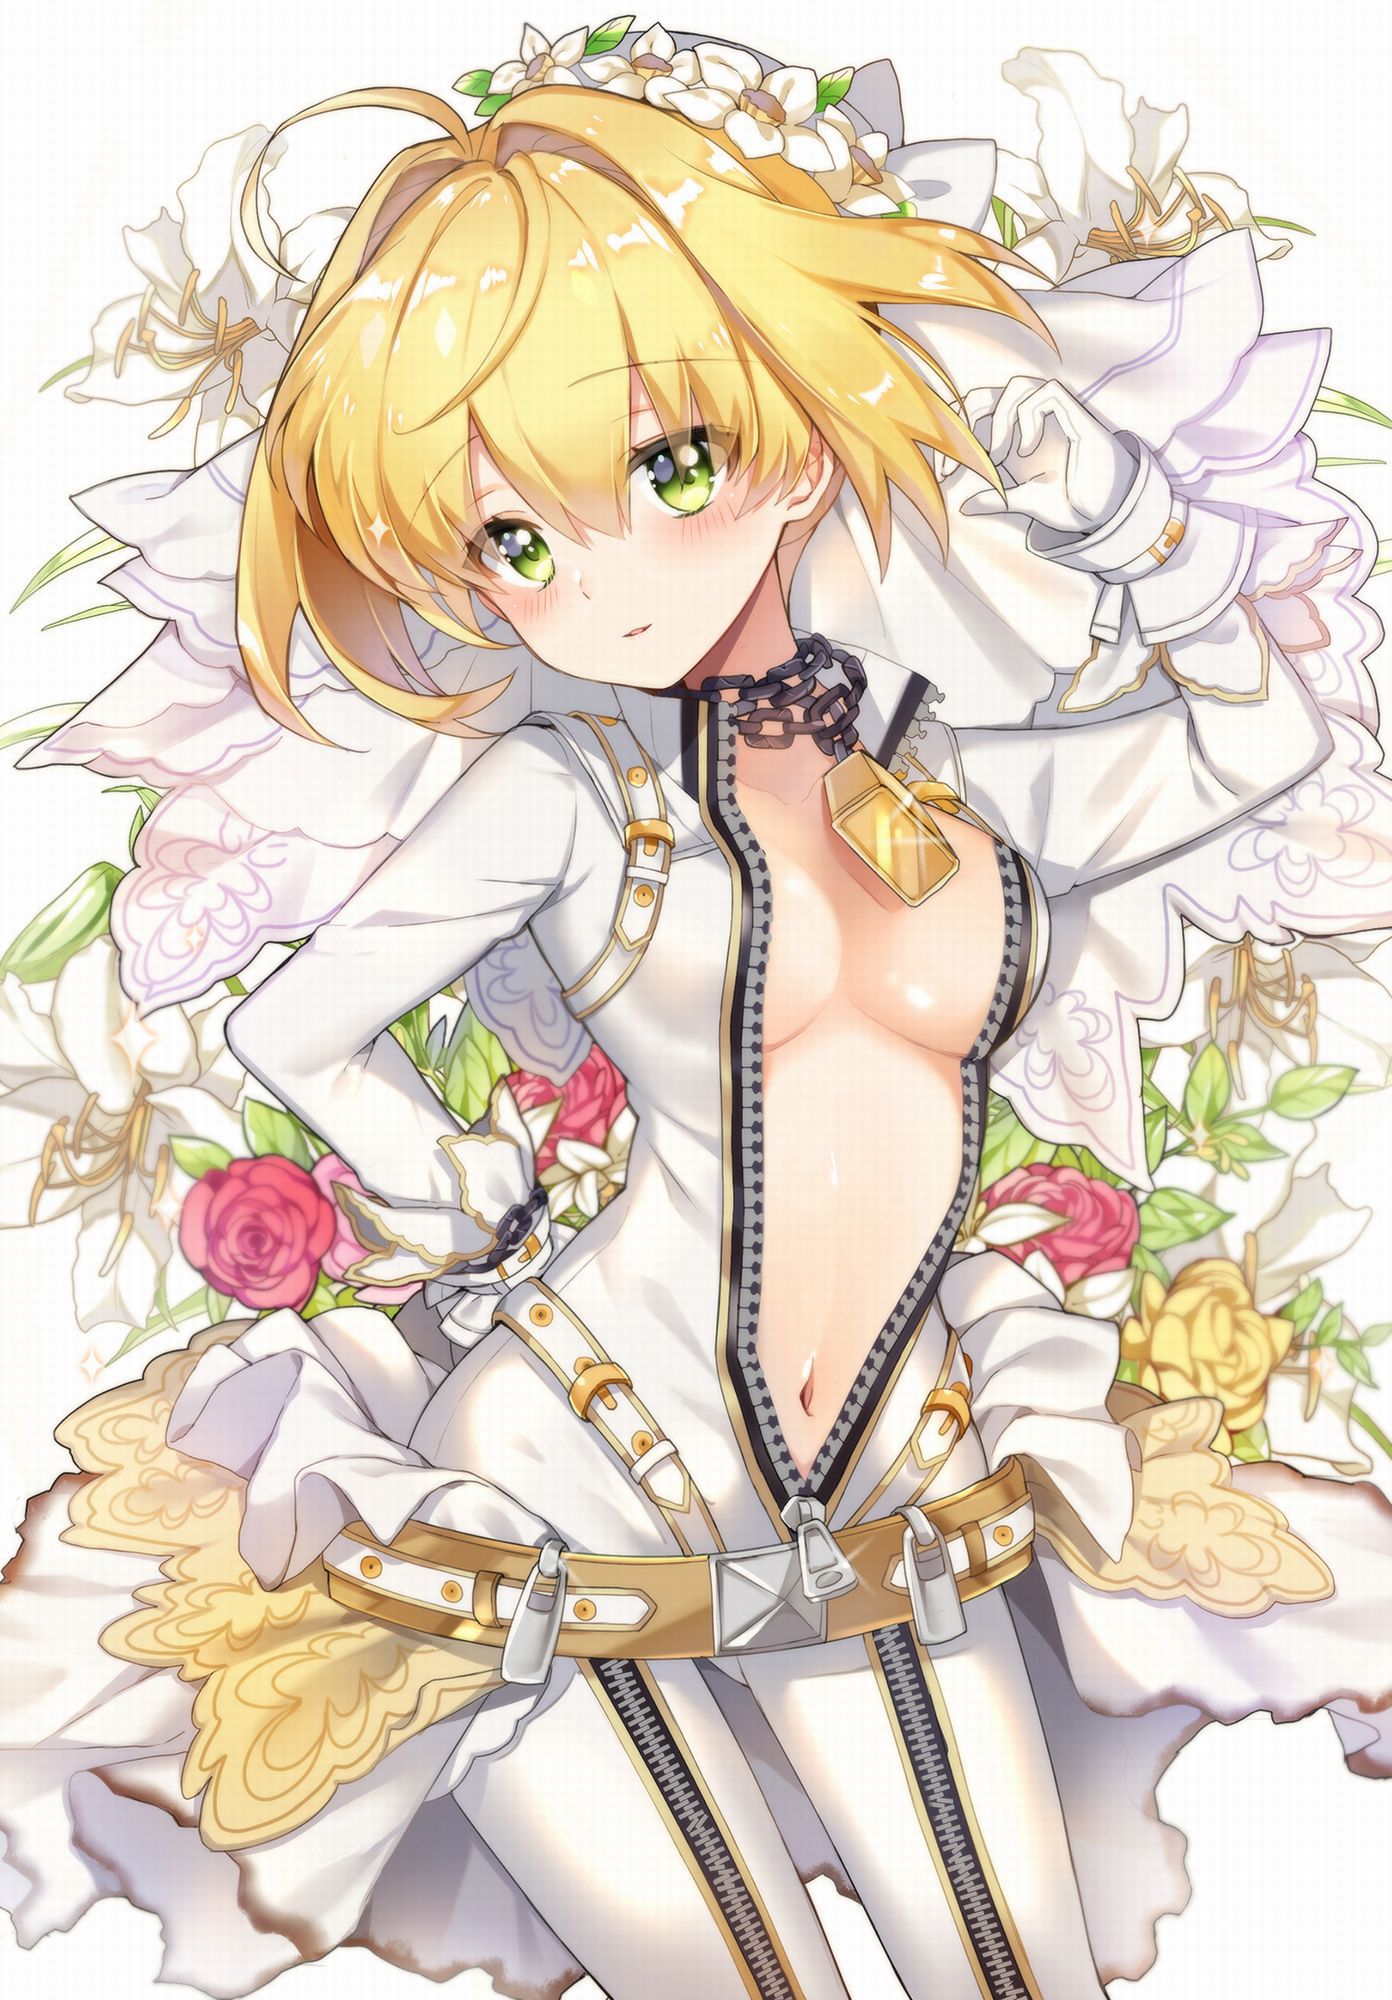 [Secondary ZIP] is about to start anime 100 pieces of cute image summary of Nero Claudius so soon 21